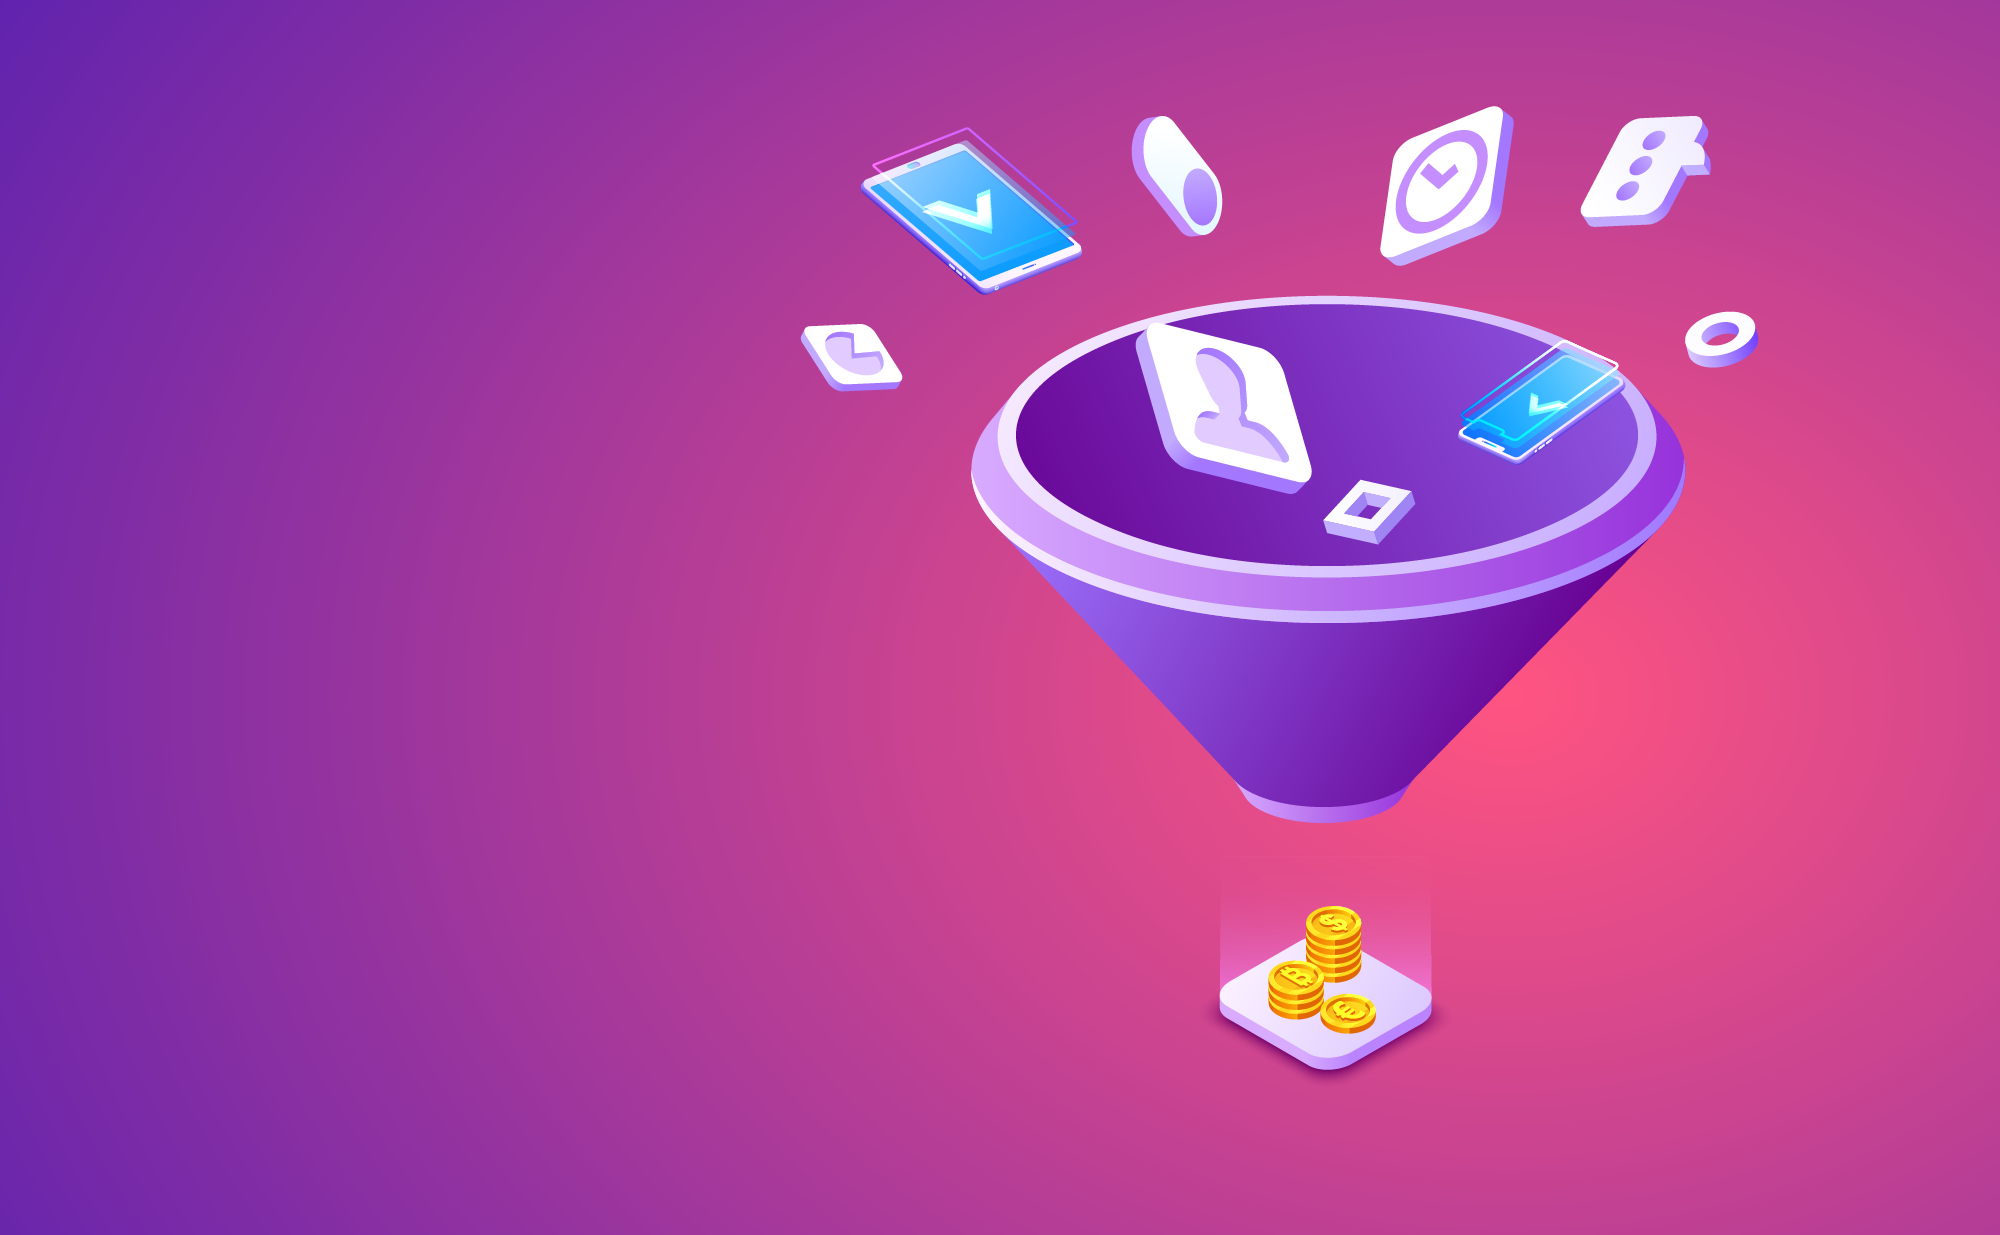 What is a Sales Funnel